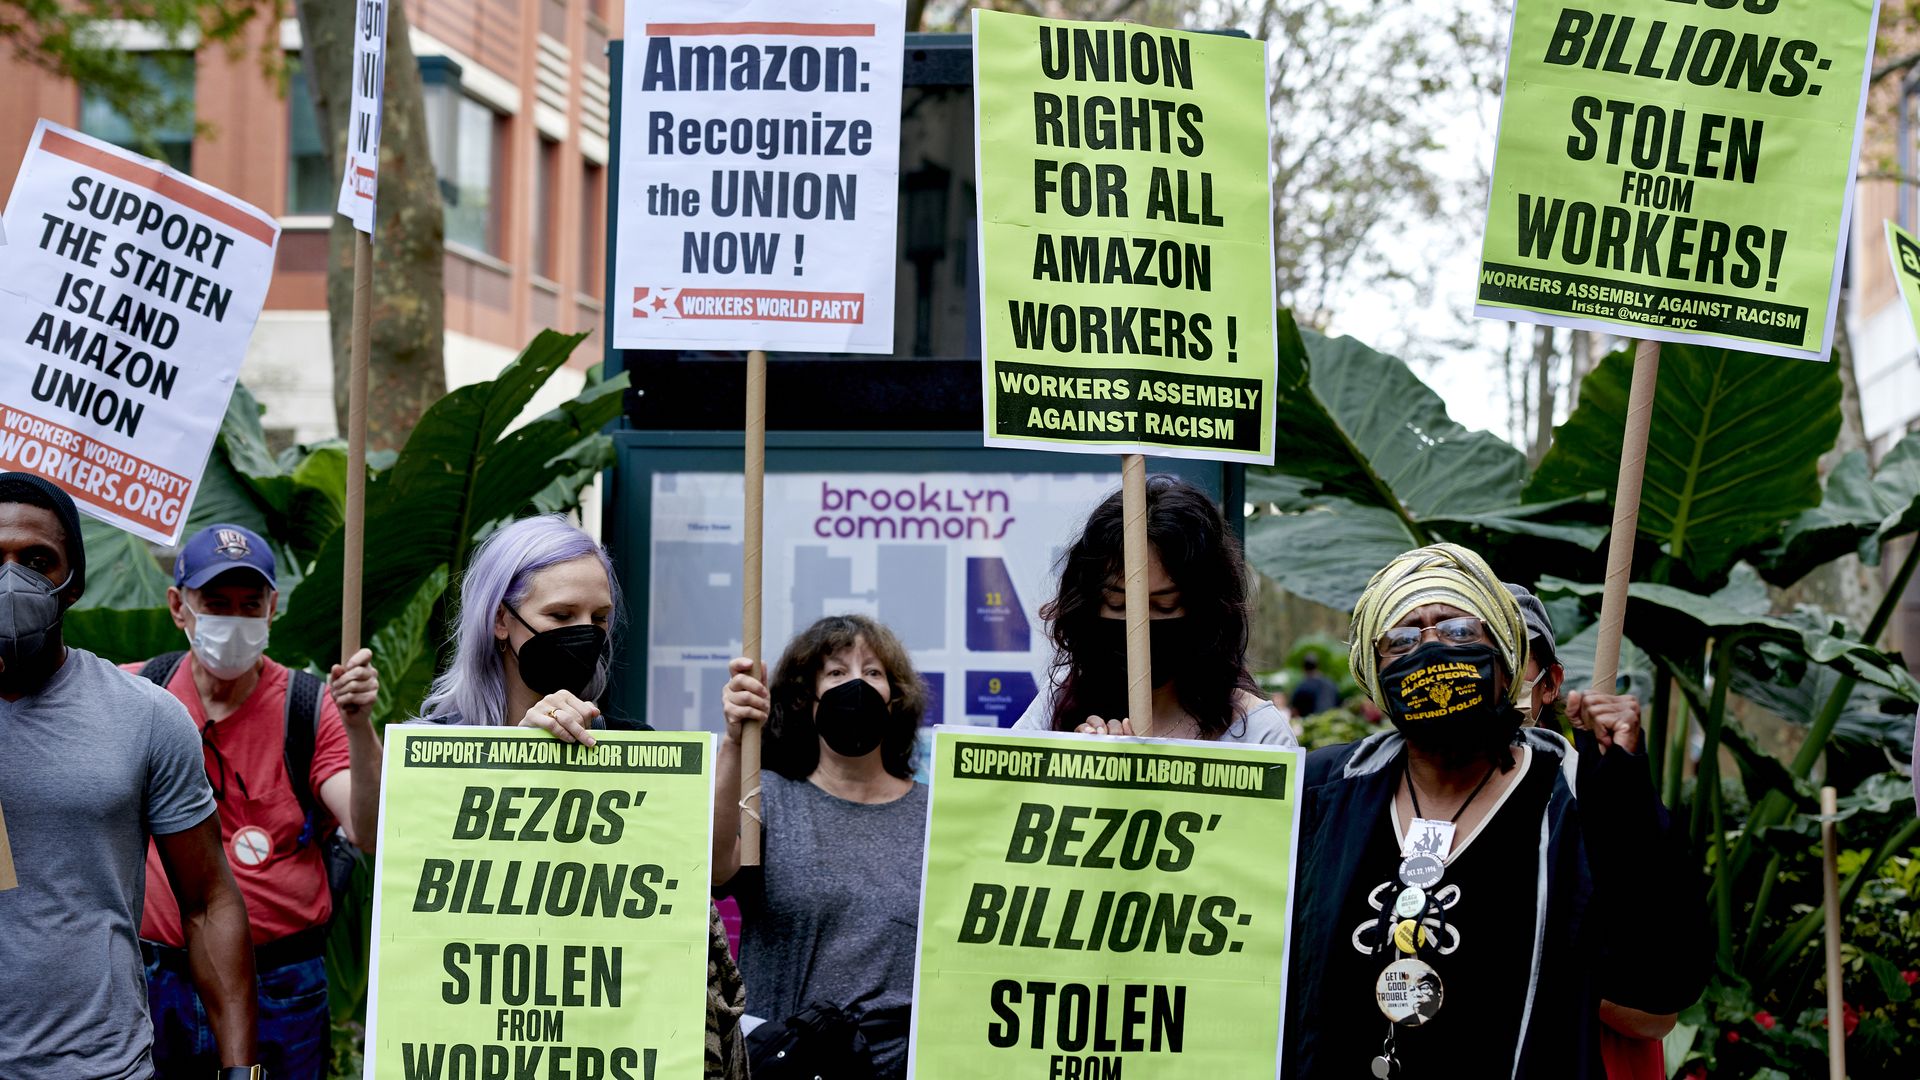 Photo of protesters holding up signs that say "Bezos' billions: stolen from workers" and "Amazon: recognize the union now!" in an outdoor rally